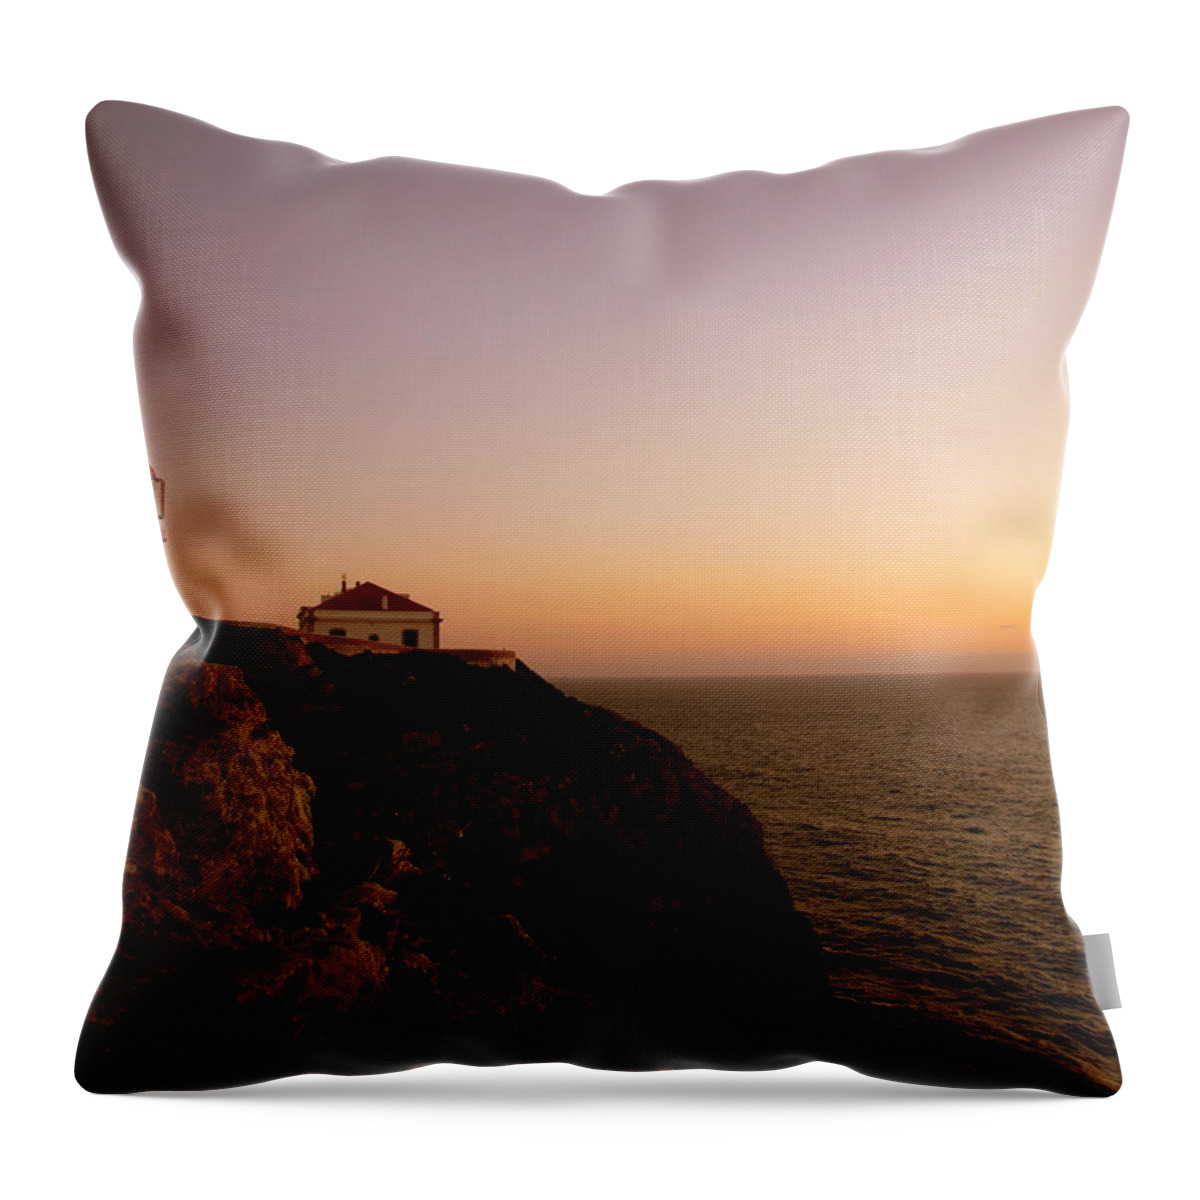 Algarve Portugal Throw Pillow featuring the photograph Algarve Portugal by Paul James Bannerman